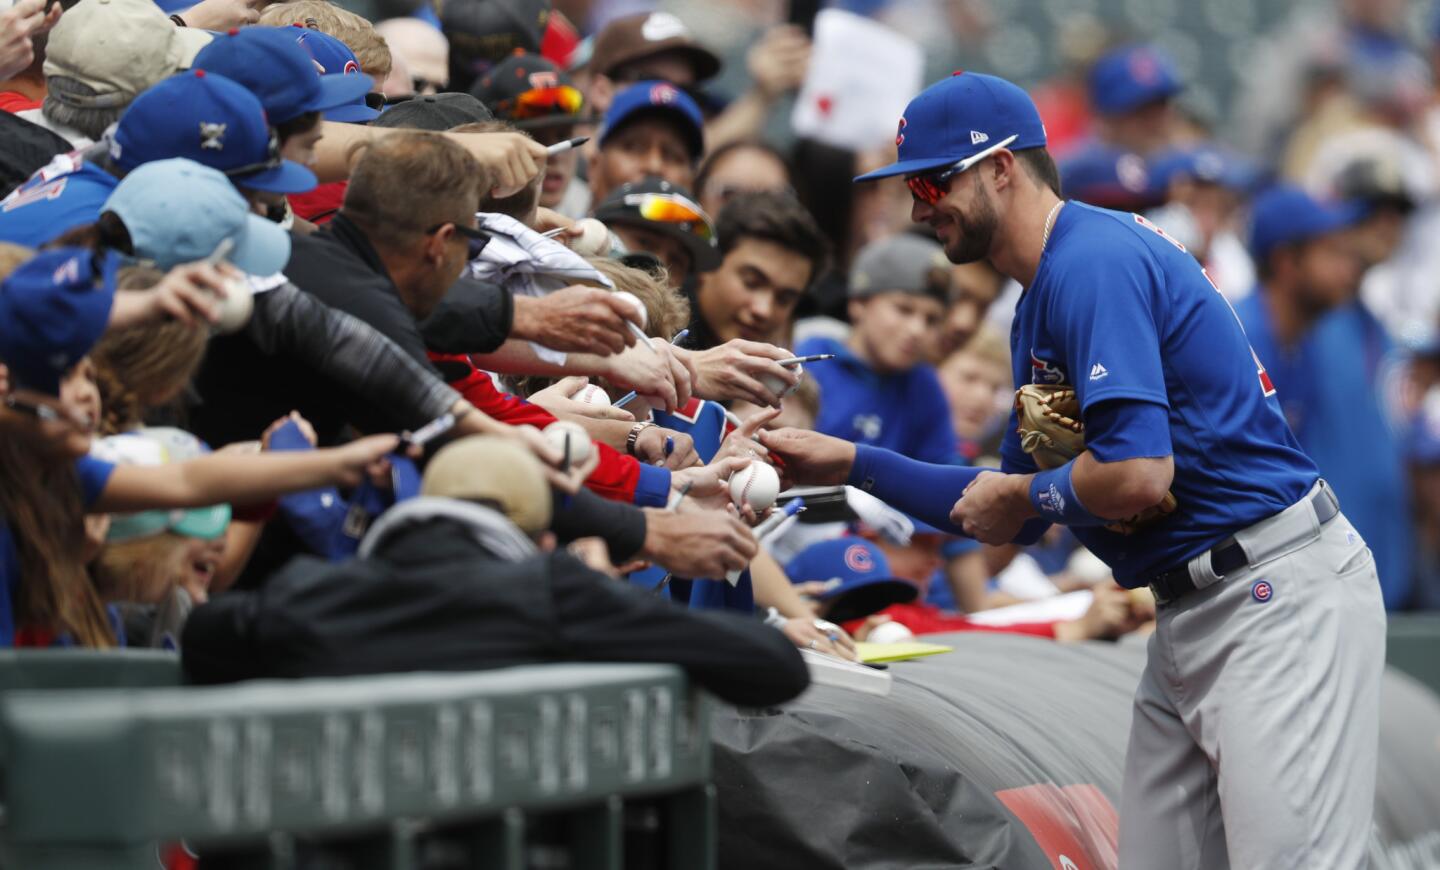 ubs third baseman Kris Bryant pauses to sign autographs for fans before facing the Rockies on Tuesday, May 9, 2017, in Denver.